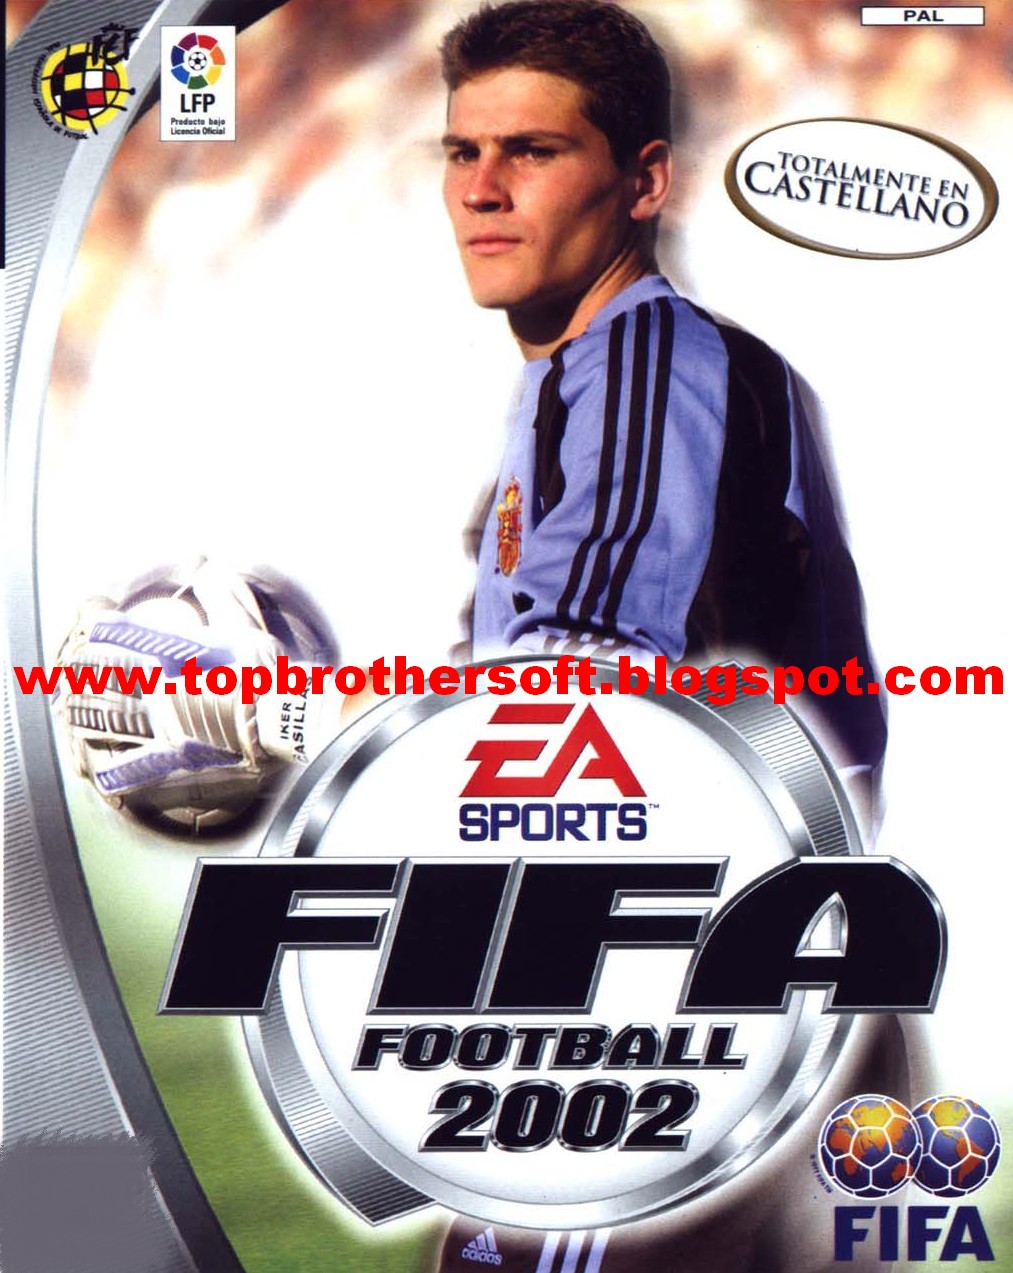 Pes 2002 Free Download For Pc